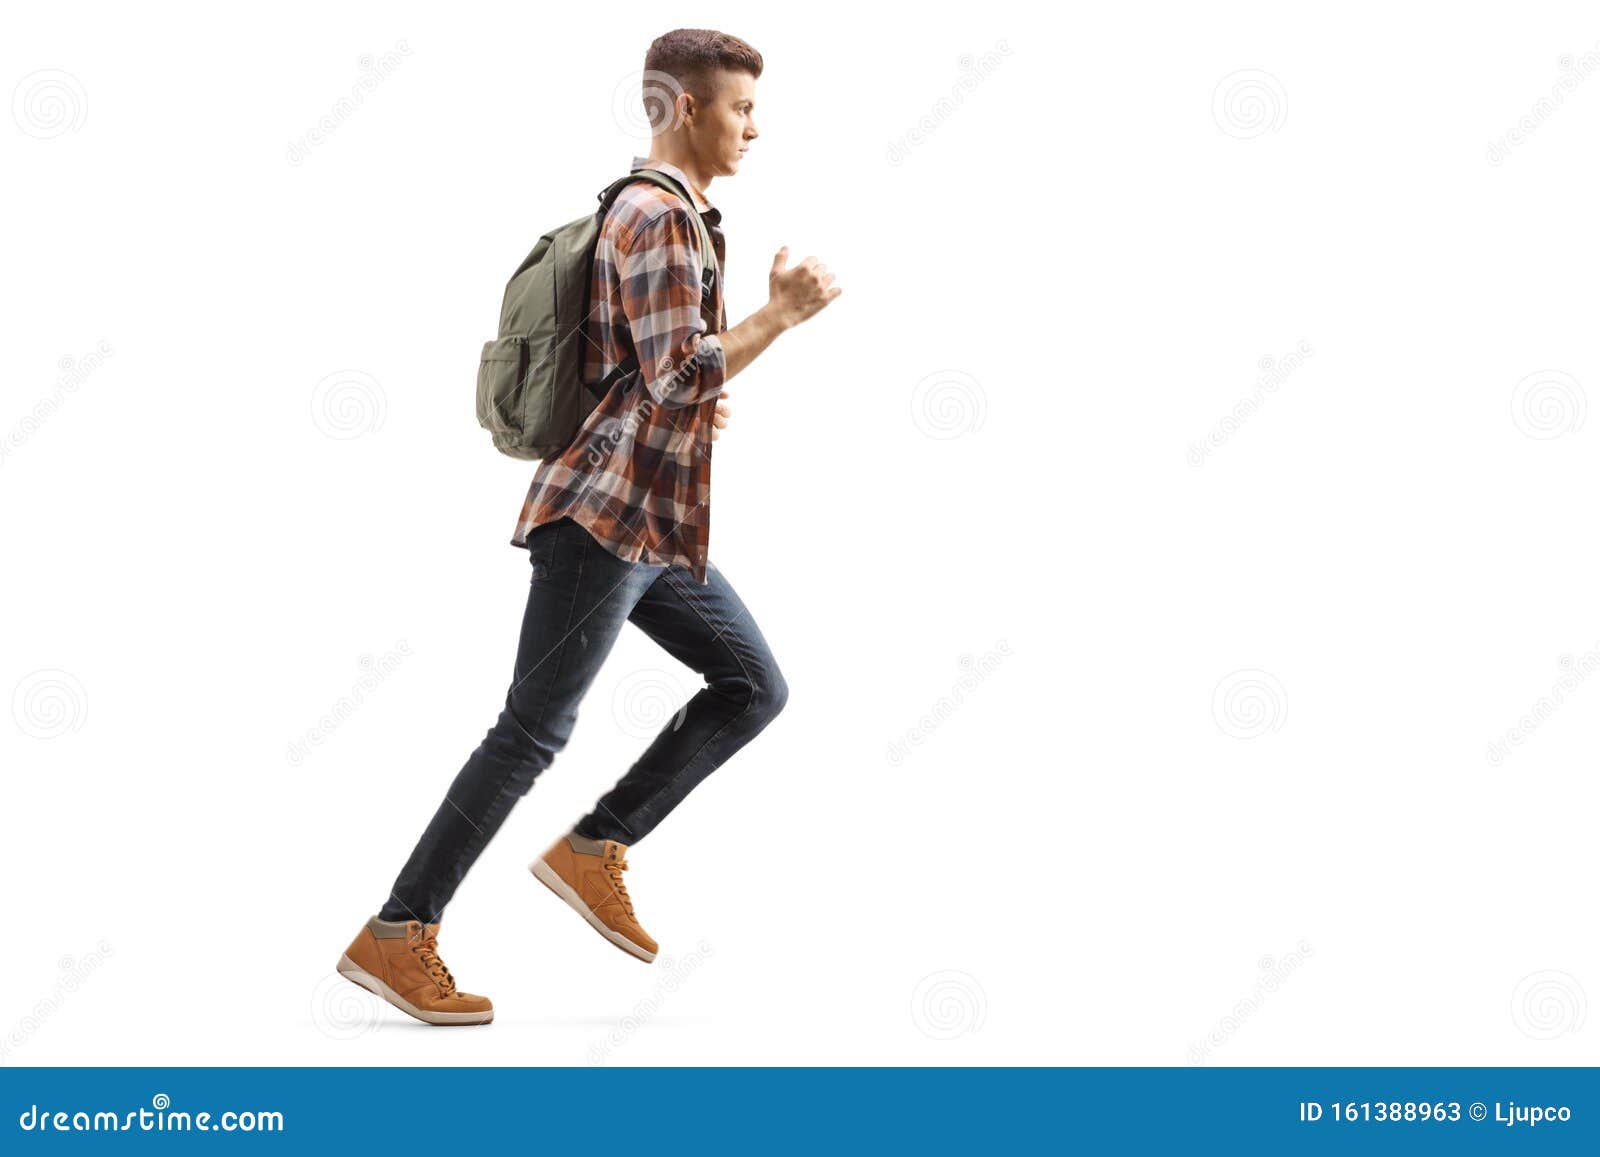 Male Student with a Backpack Running Stock Image - Image of education